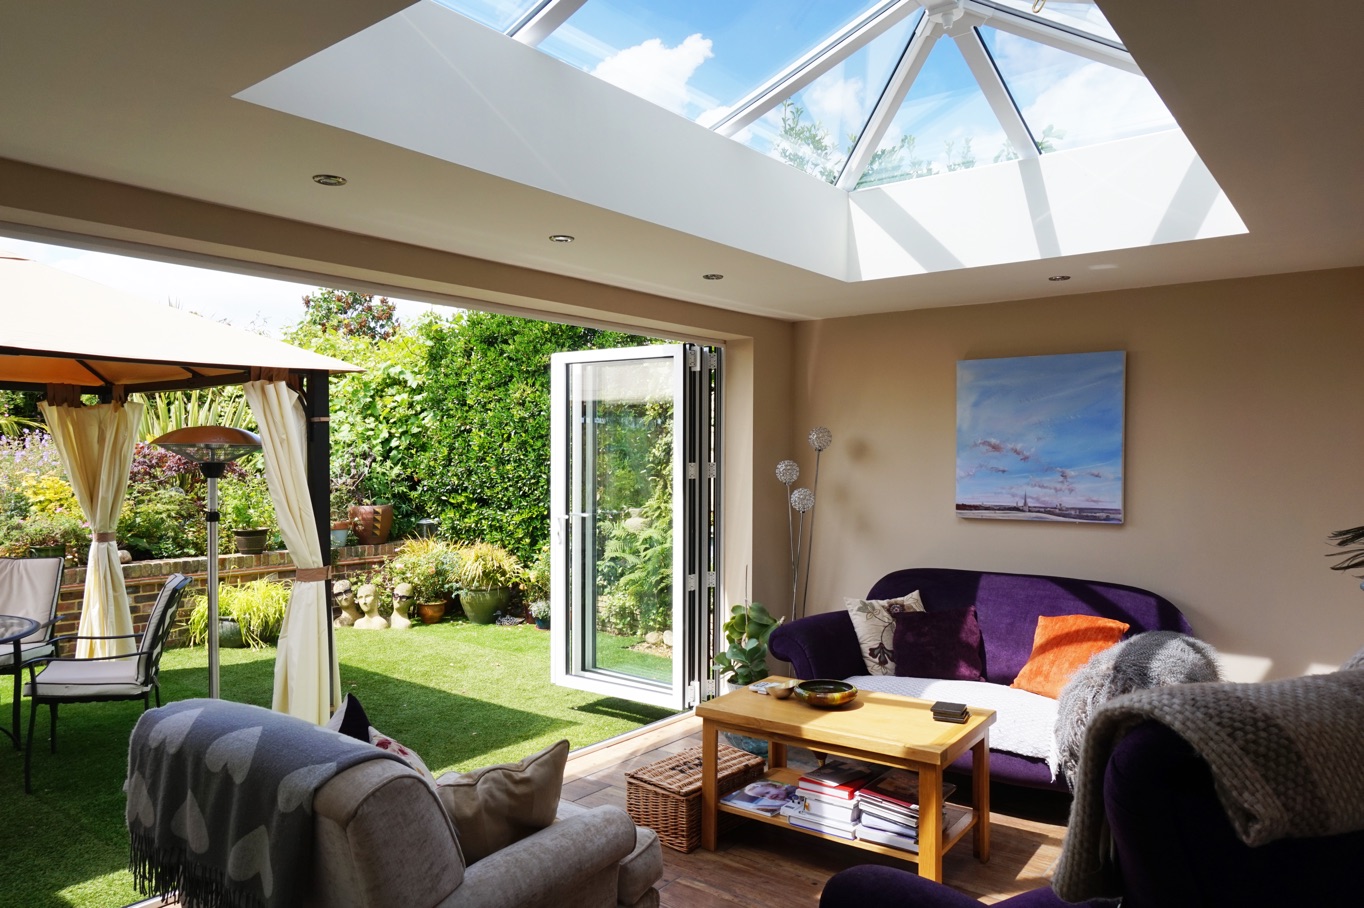 Interior photo of the Conservatory to Orangery transformation